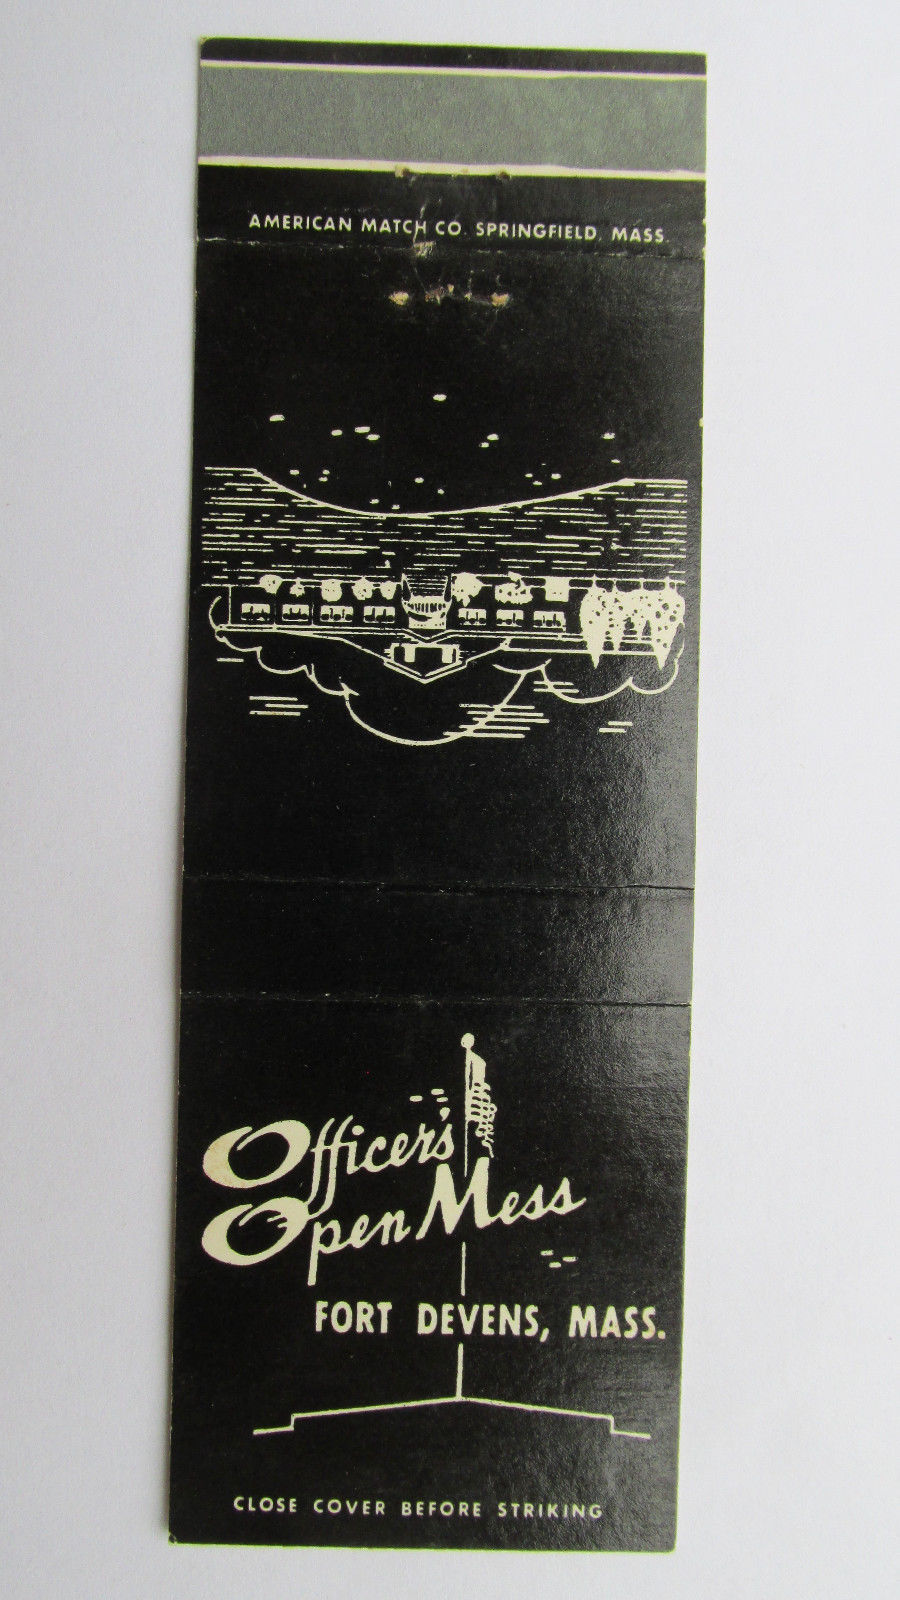 Primary image for Fort Devens, Massachusetts 20 Strike Military Matchbook Cover American Match MA